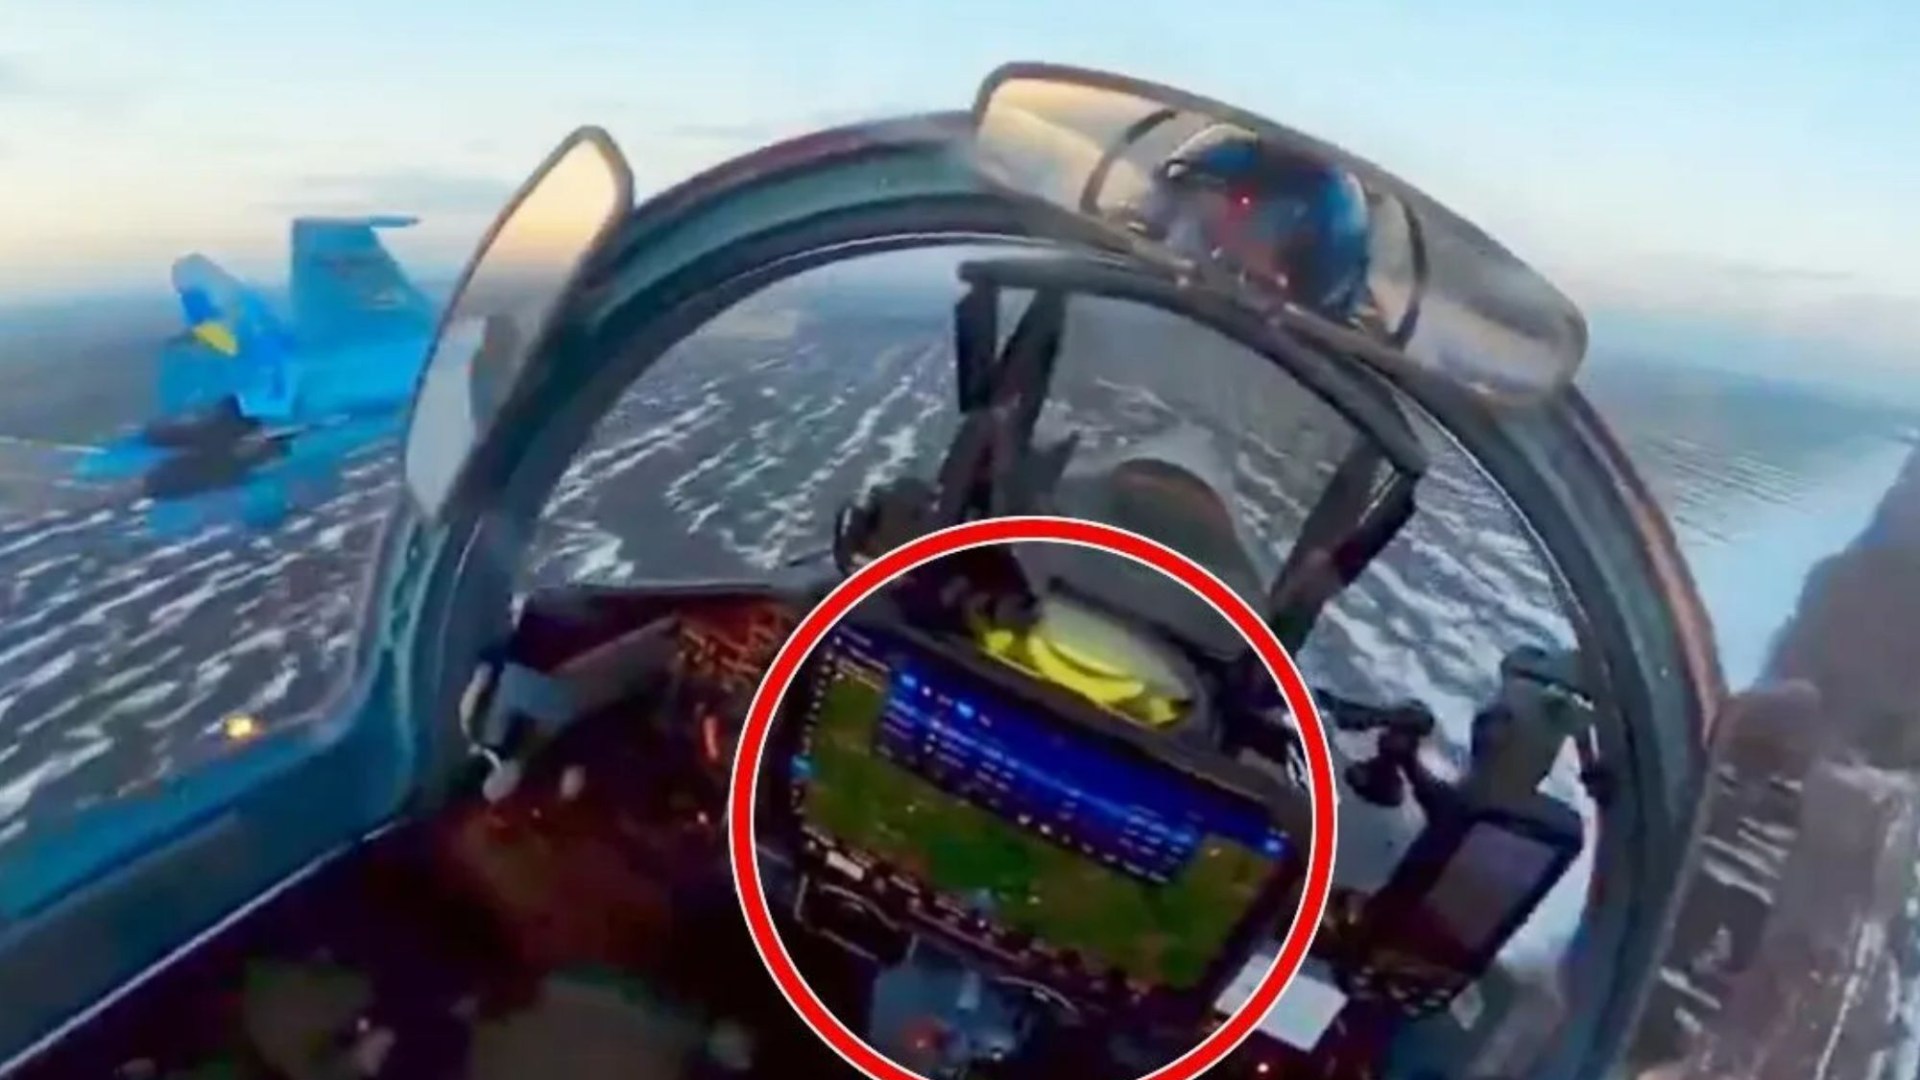 Dramatic moment Ukrainian pilot uses iPad to launch American missiles in daring mission to hit Putin’s Russian radars [Video]